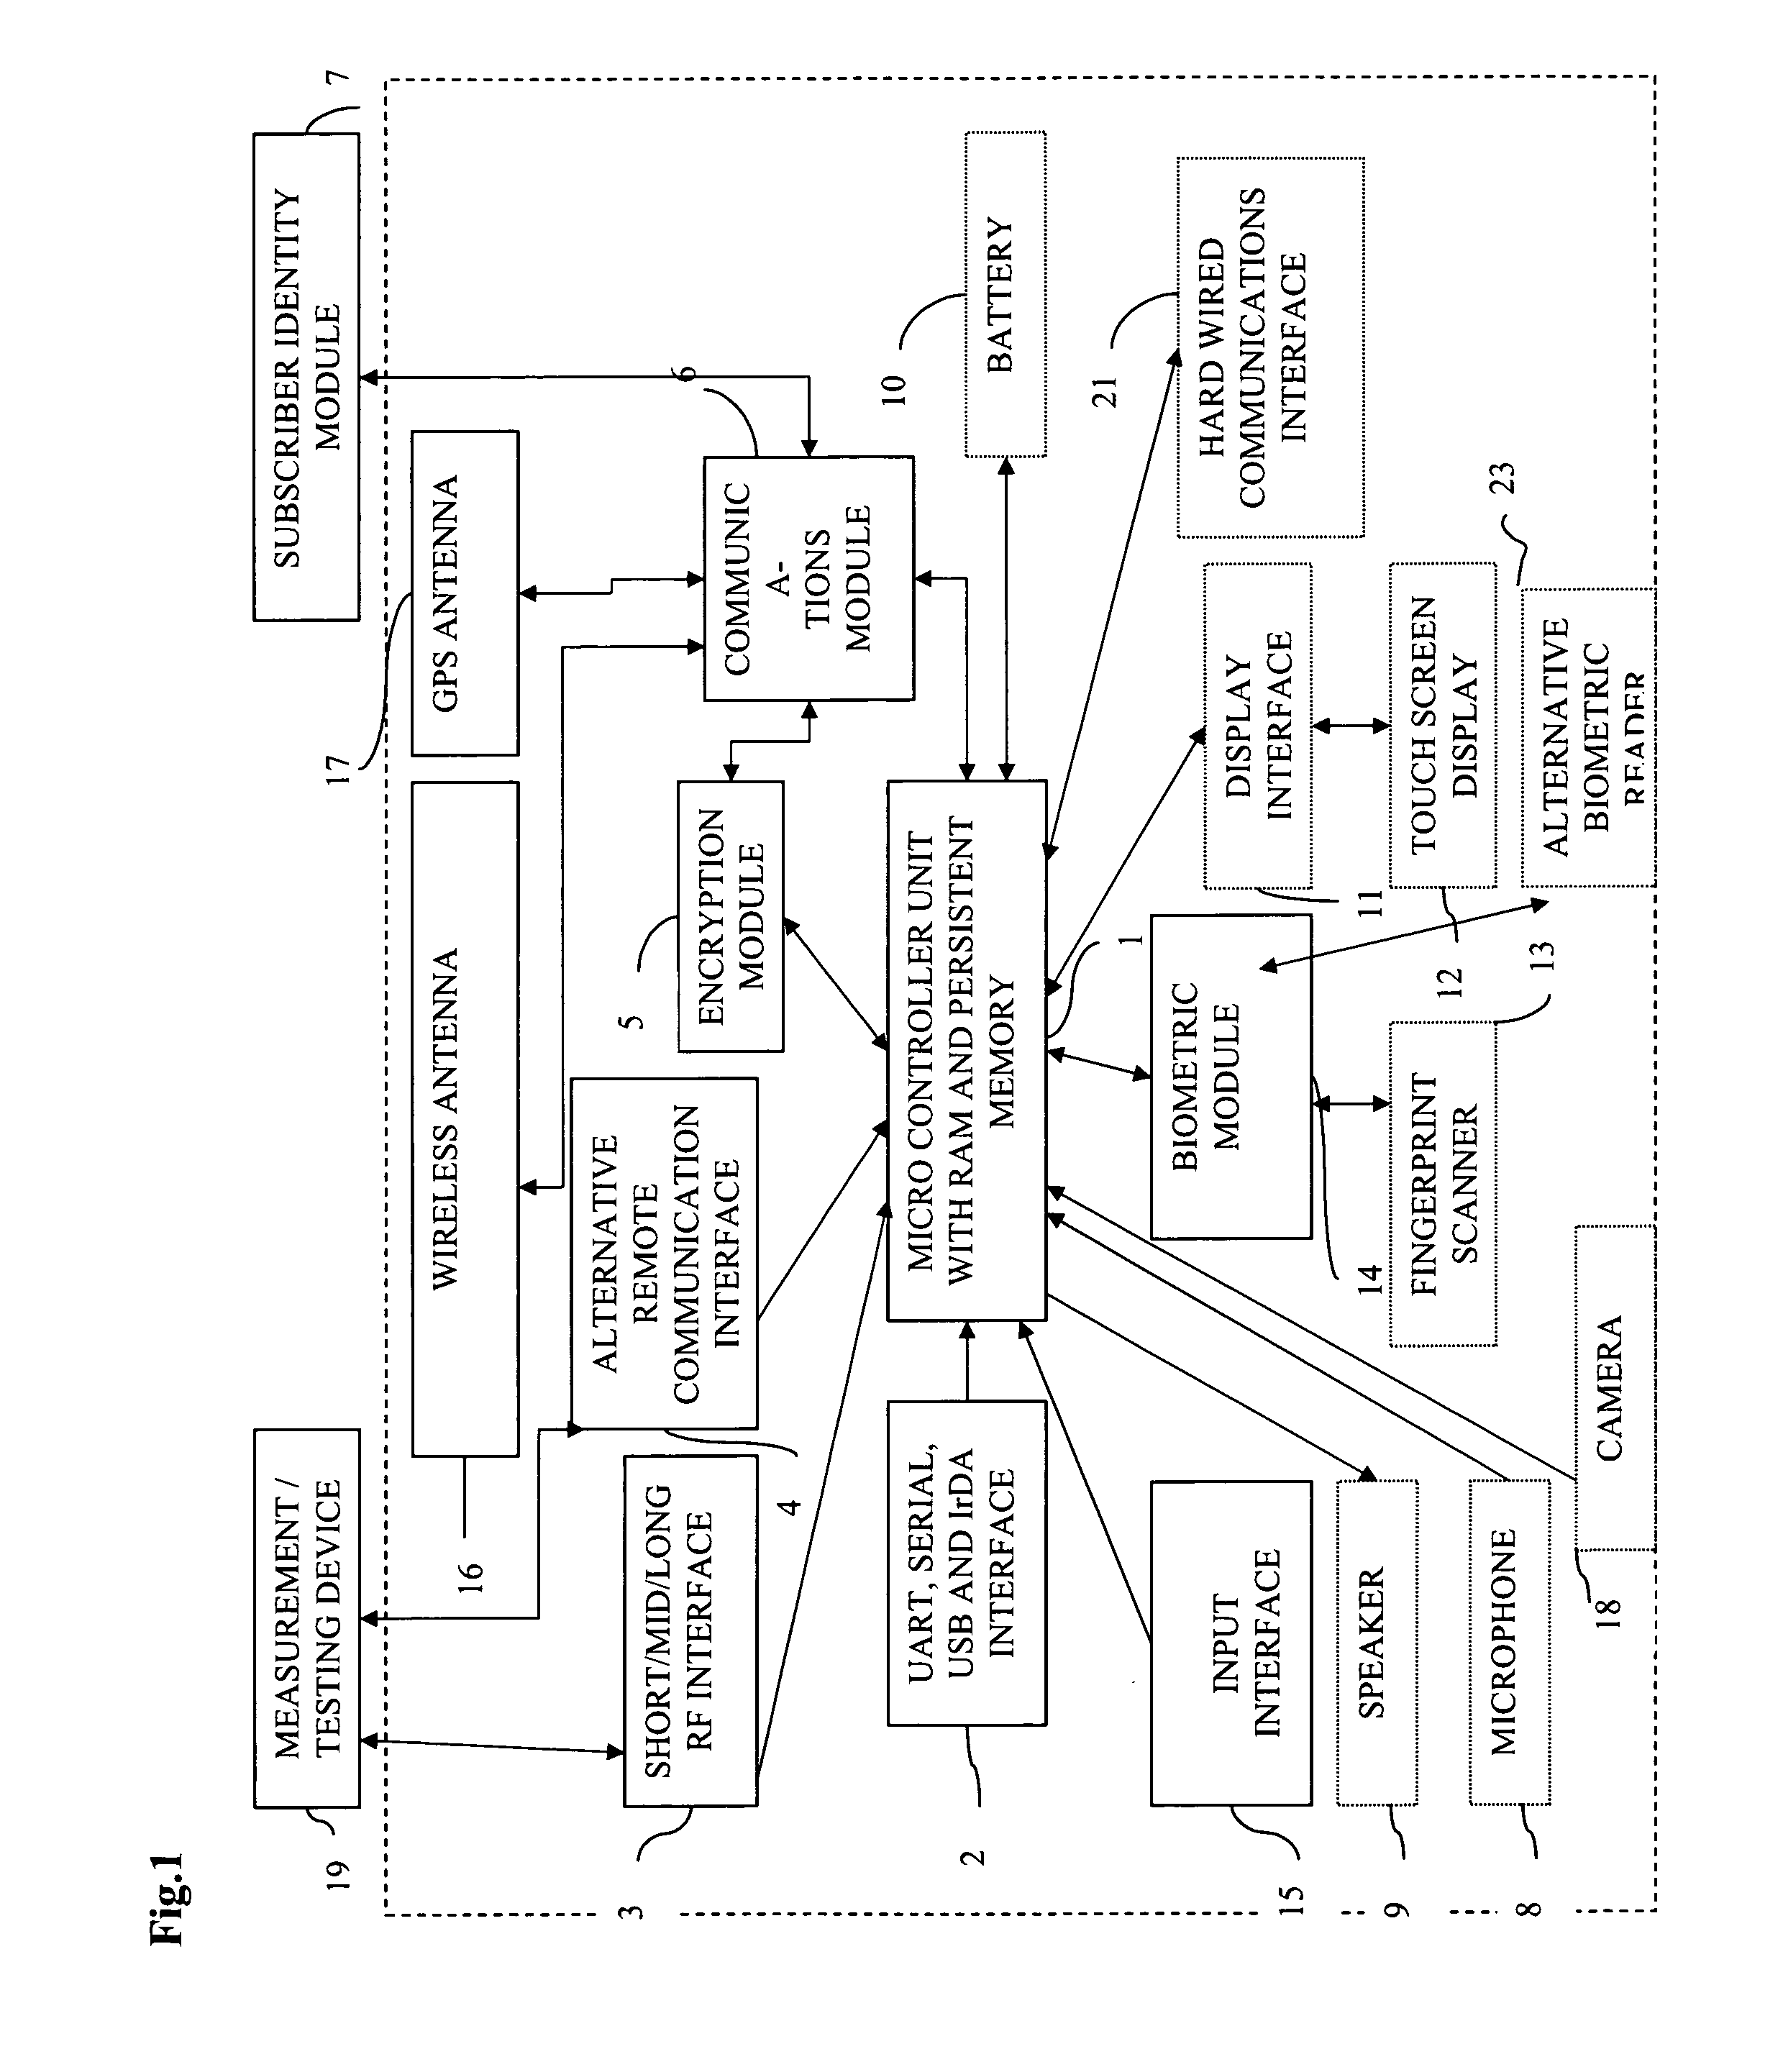 Patient Management Support System for Patient Testing and Monitoring Devices